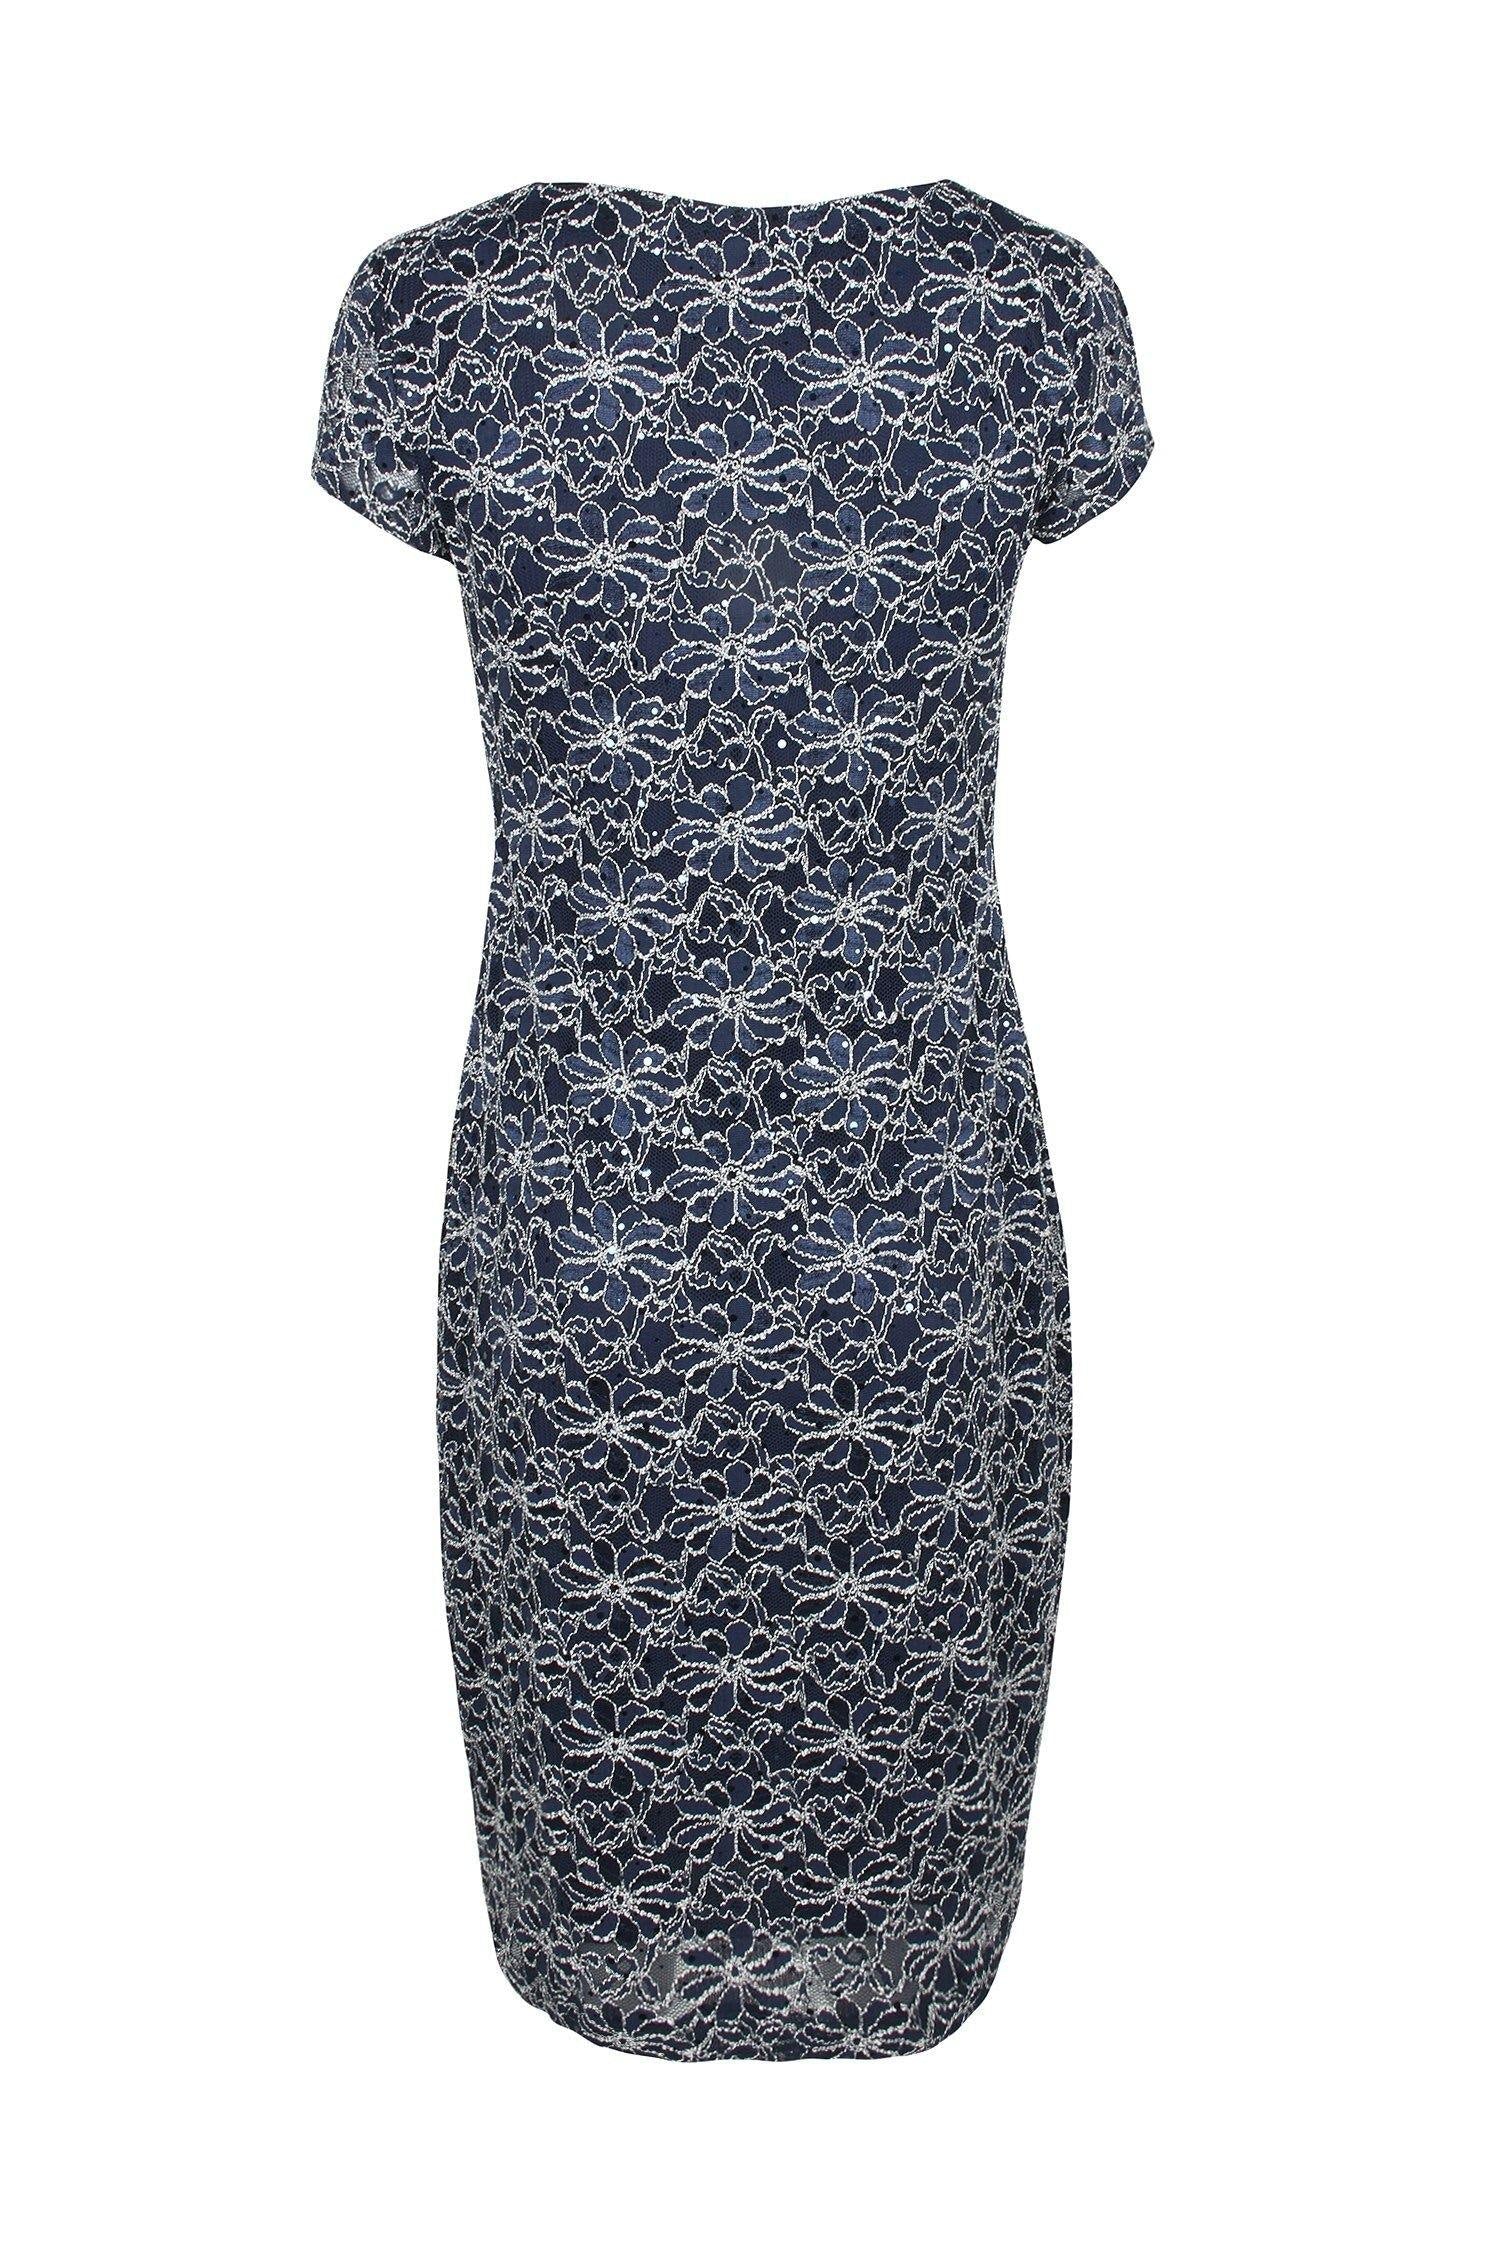 Connected Apparel Short Sleeve Bodycon Lace Dress - The Dress Outlet